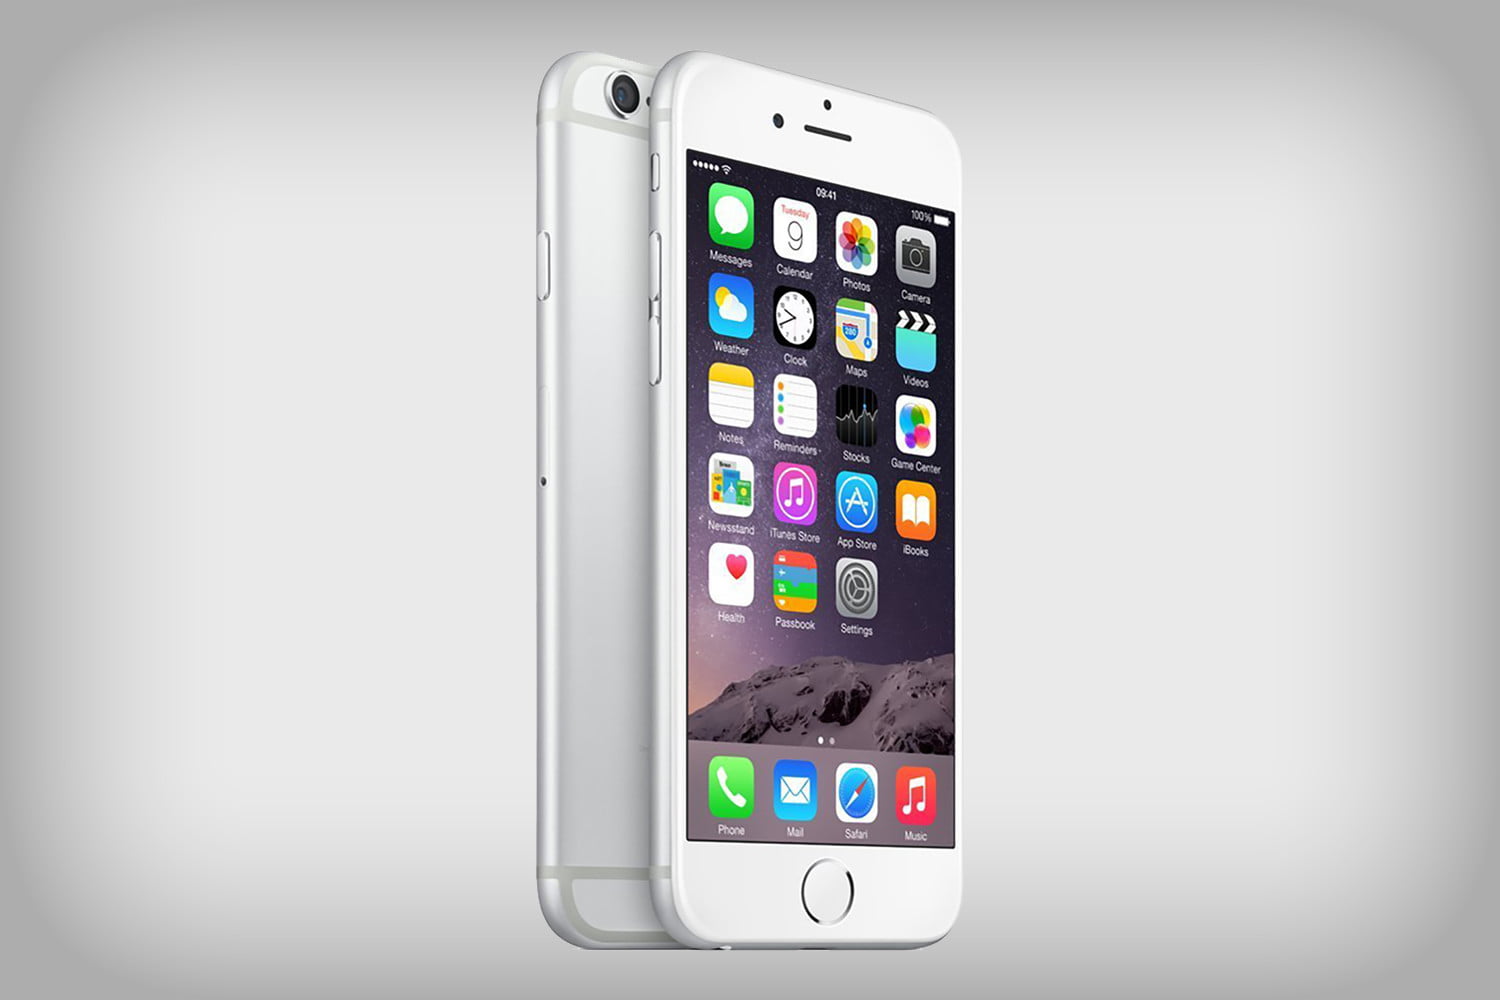 Buy a professionally refurbished iPhone 6 and save $100 - KXXV Central Texas News Now